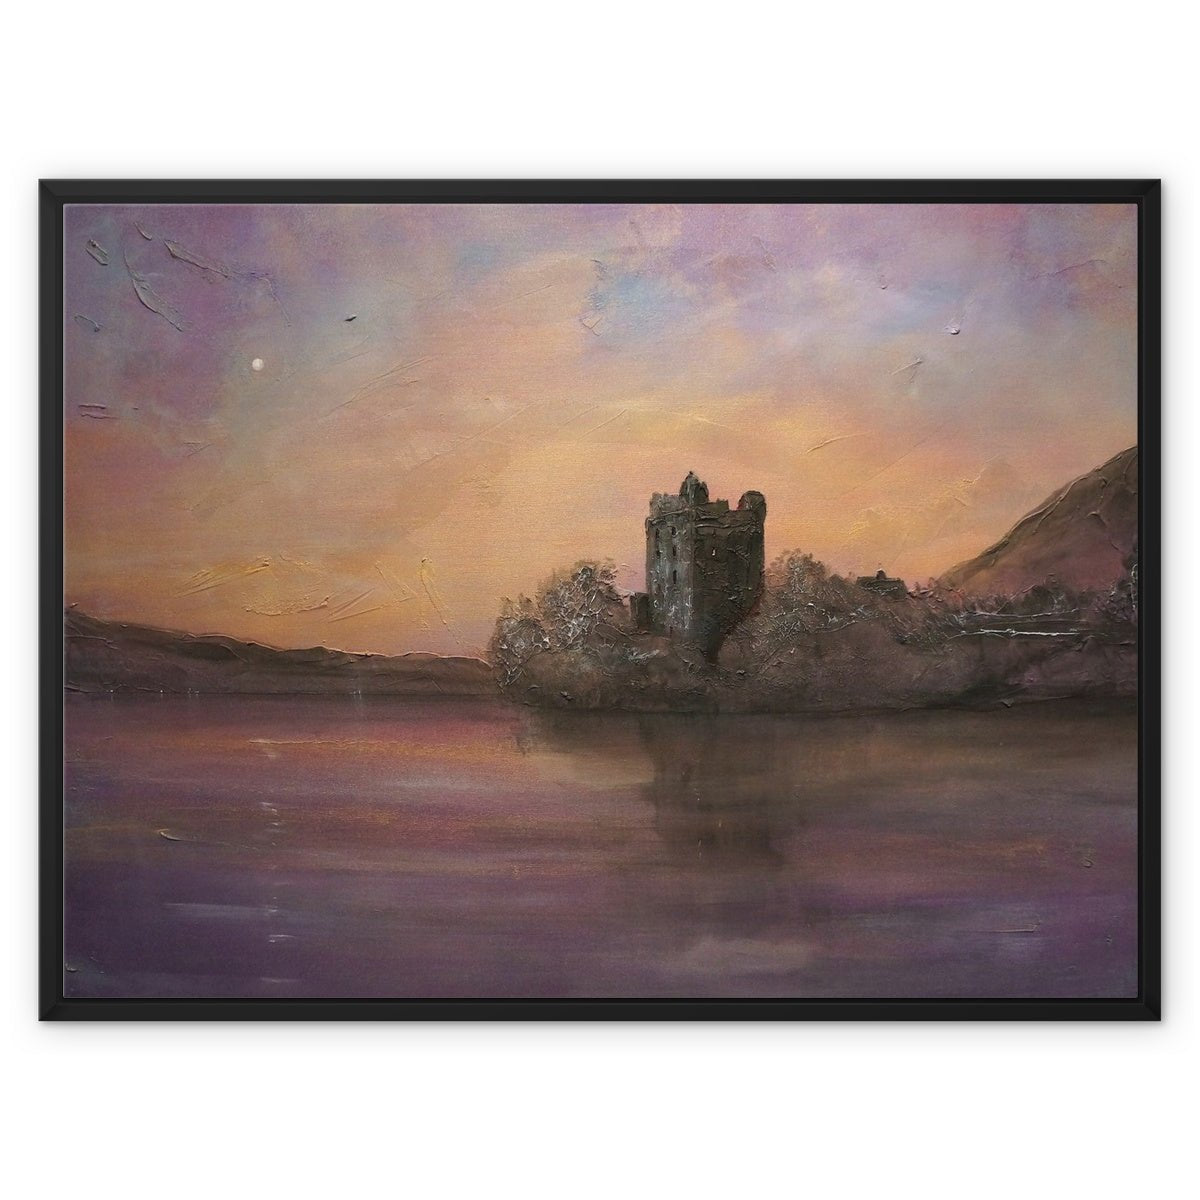 Urquhart Castle Moonlight Painting | Framed Canvas From Scotland-Floating Framed Canvas Prints-Historic & Iconic Scotland Art Gallery-32"x24"-Black Frame-Paintings, Prints, Homeware, Art Gifts From Scotland By Scottish Artist Kevin Hunter